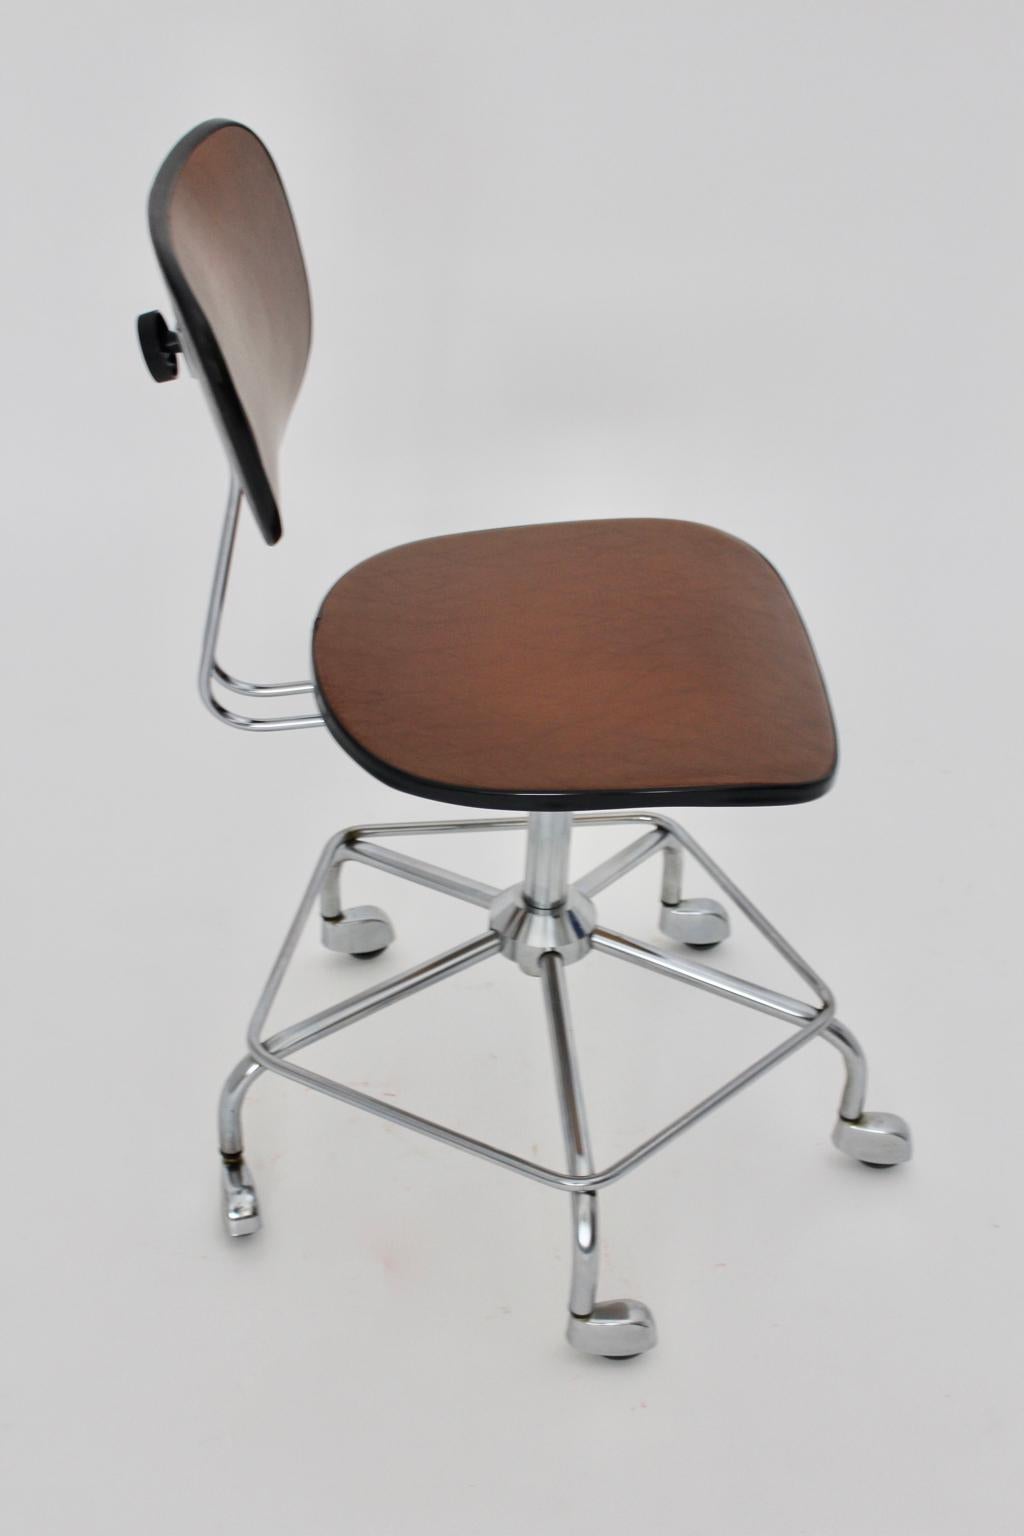 Mid Century Modern adjustable and swiveling vintage desk chair in brown faux leather attributed to Egon Eiermann, 1950s Germany.
The seat and back made of plywood were covered with brown faux leather. Furthermore the desk chair shows a chrome-plated